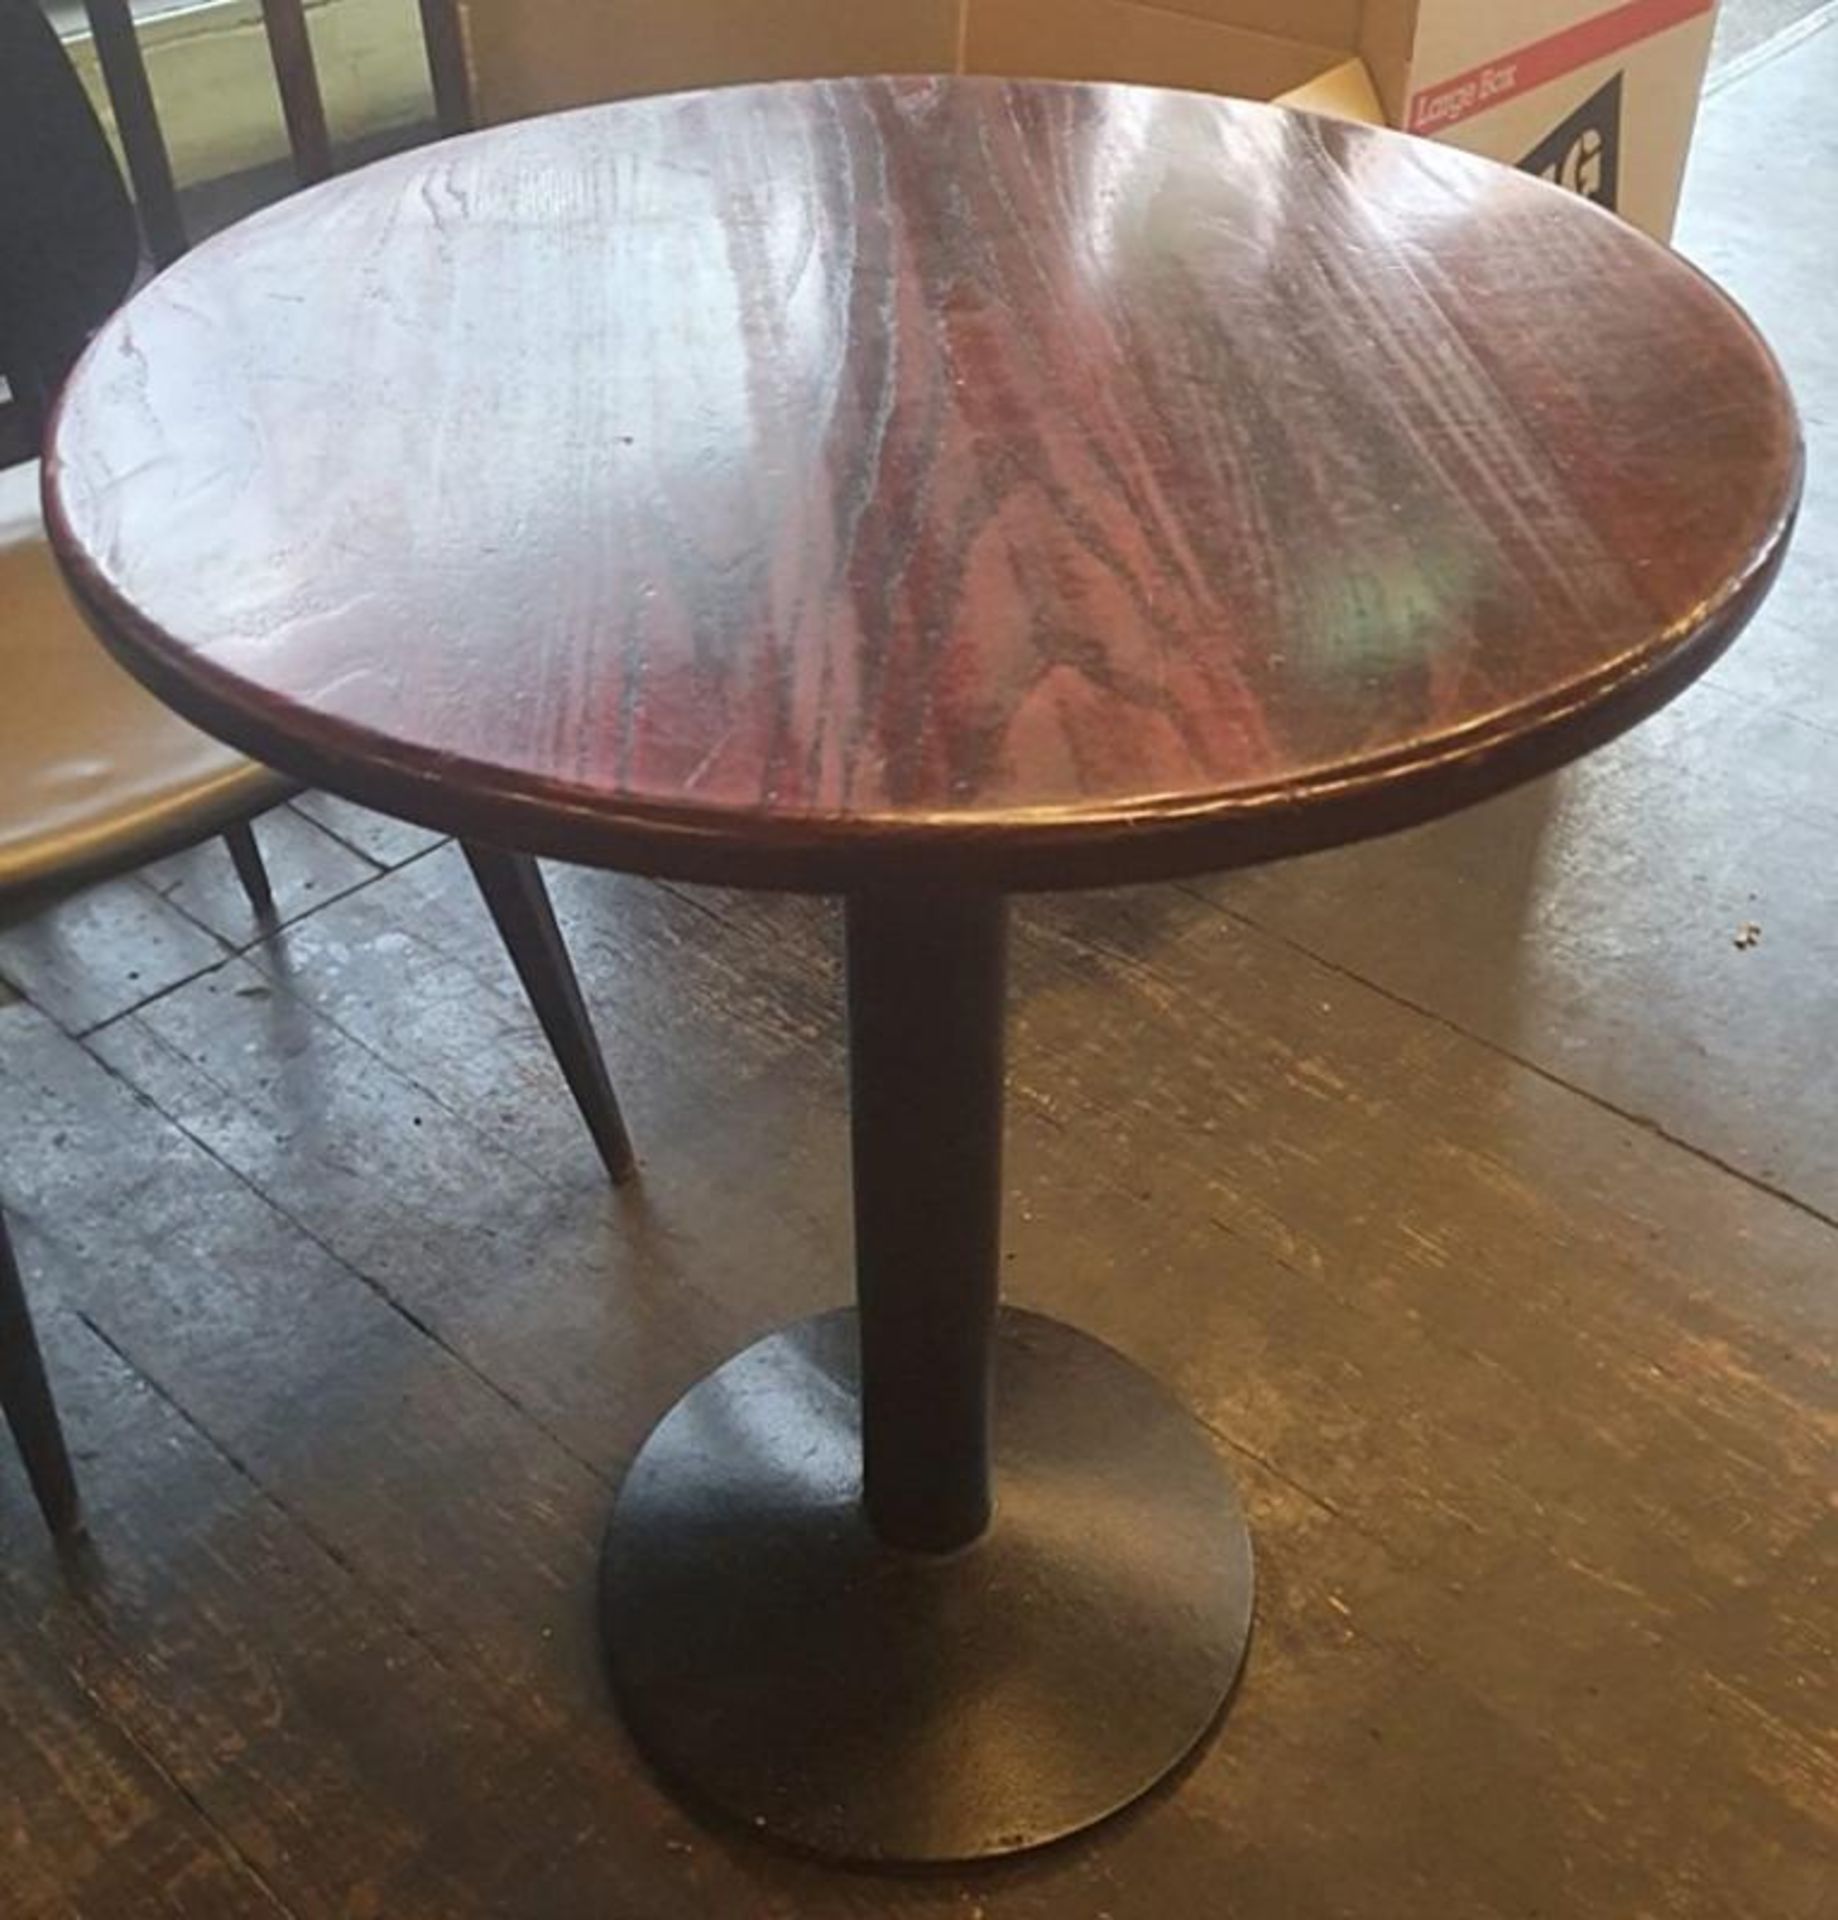 3 x Round Bistro Tables With Cherry Wood Tops - Dimensions: Diameter 61cm, Height 77cm - Recently Ta